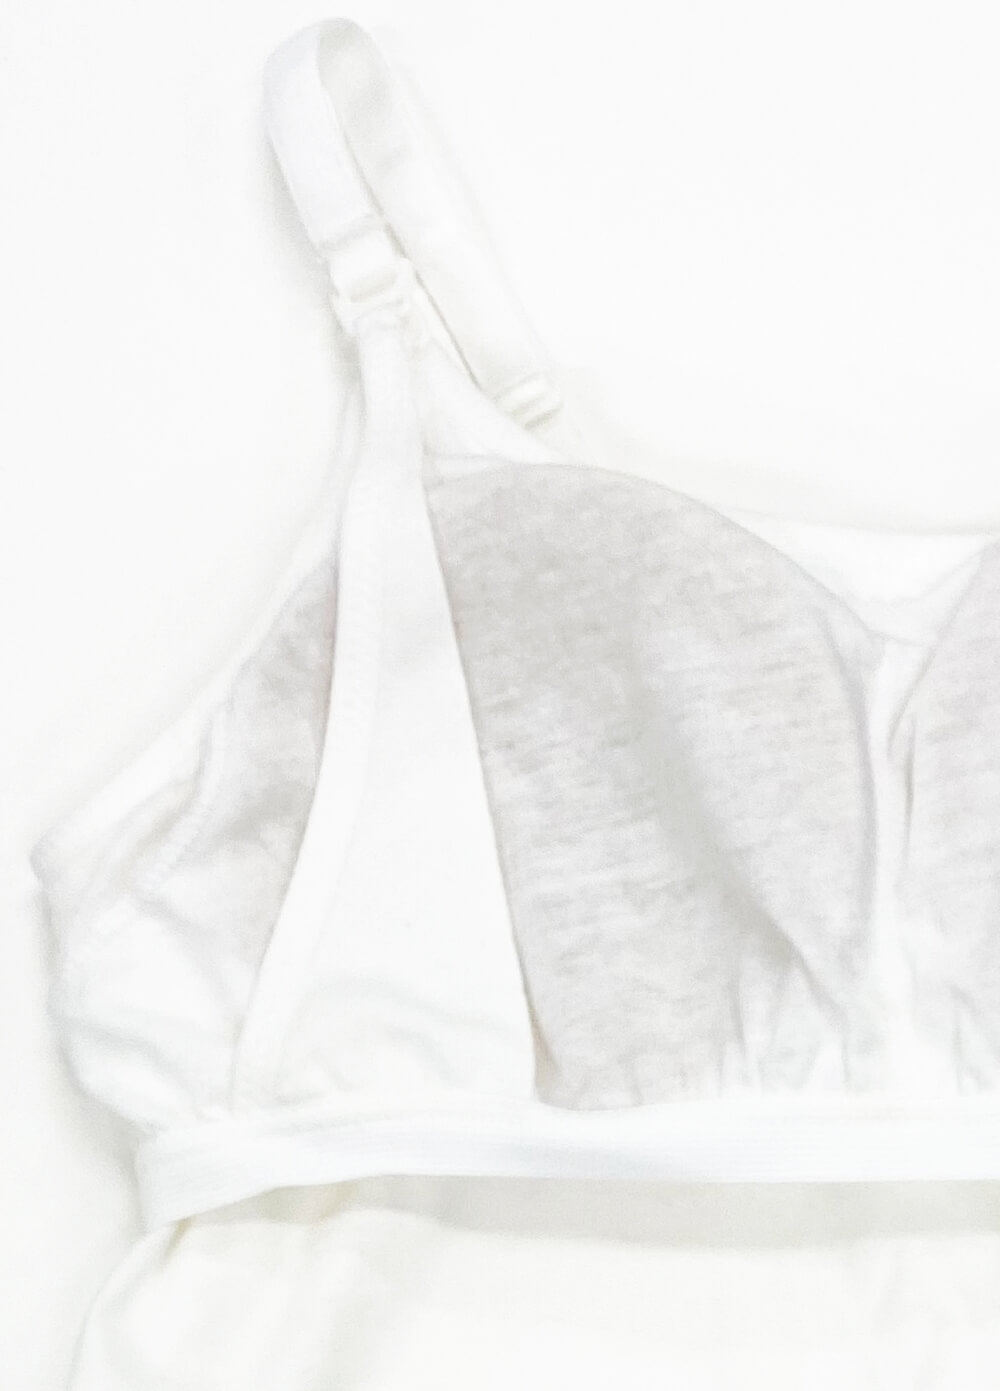 Queen Bee - Romily Layering Nursing Camisole in White